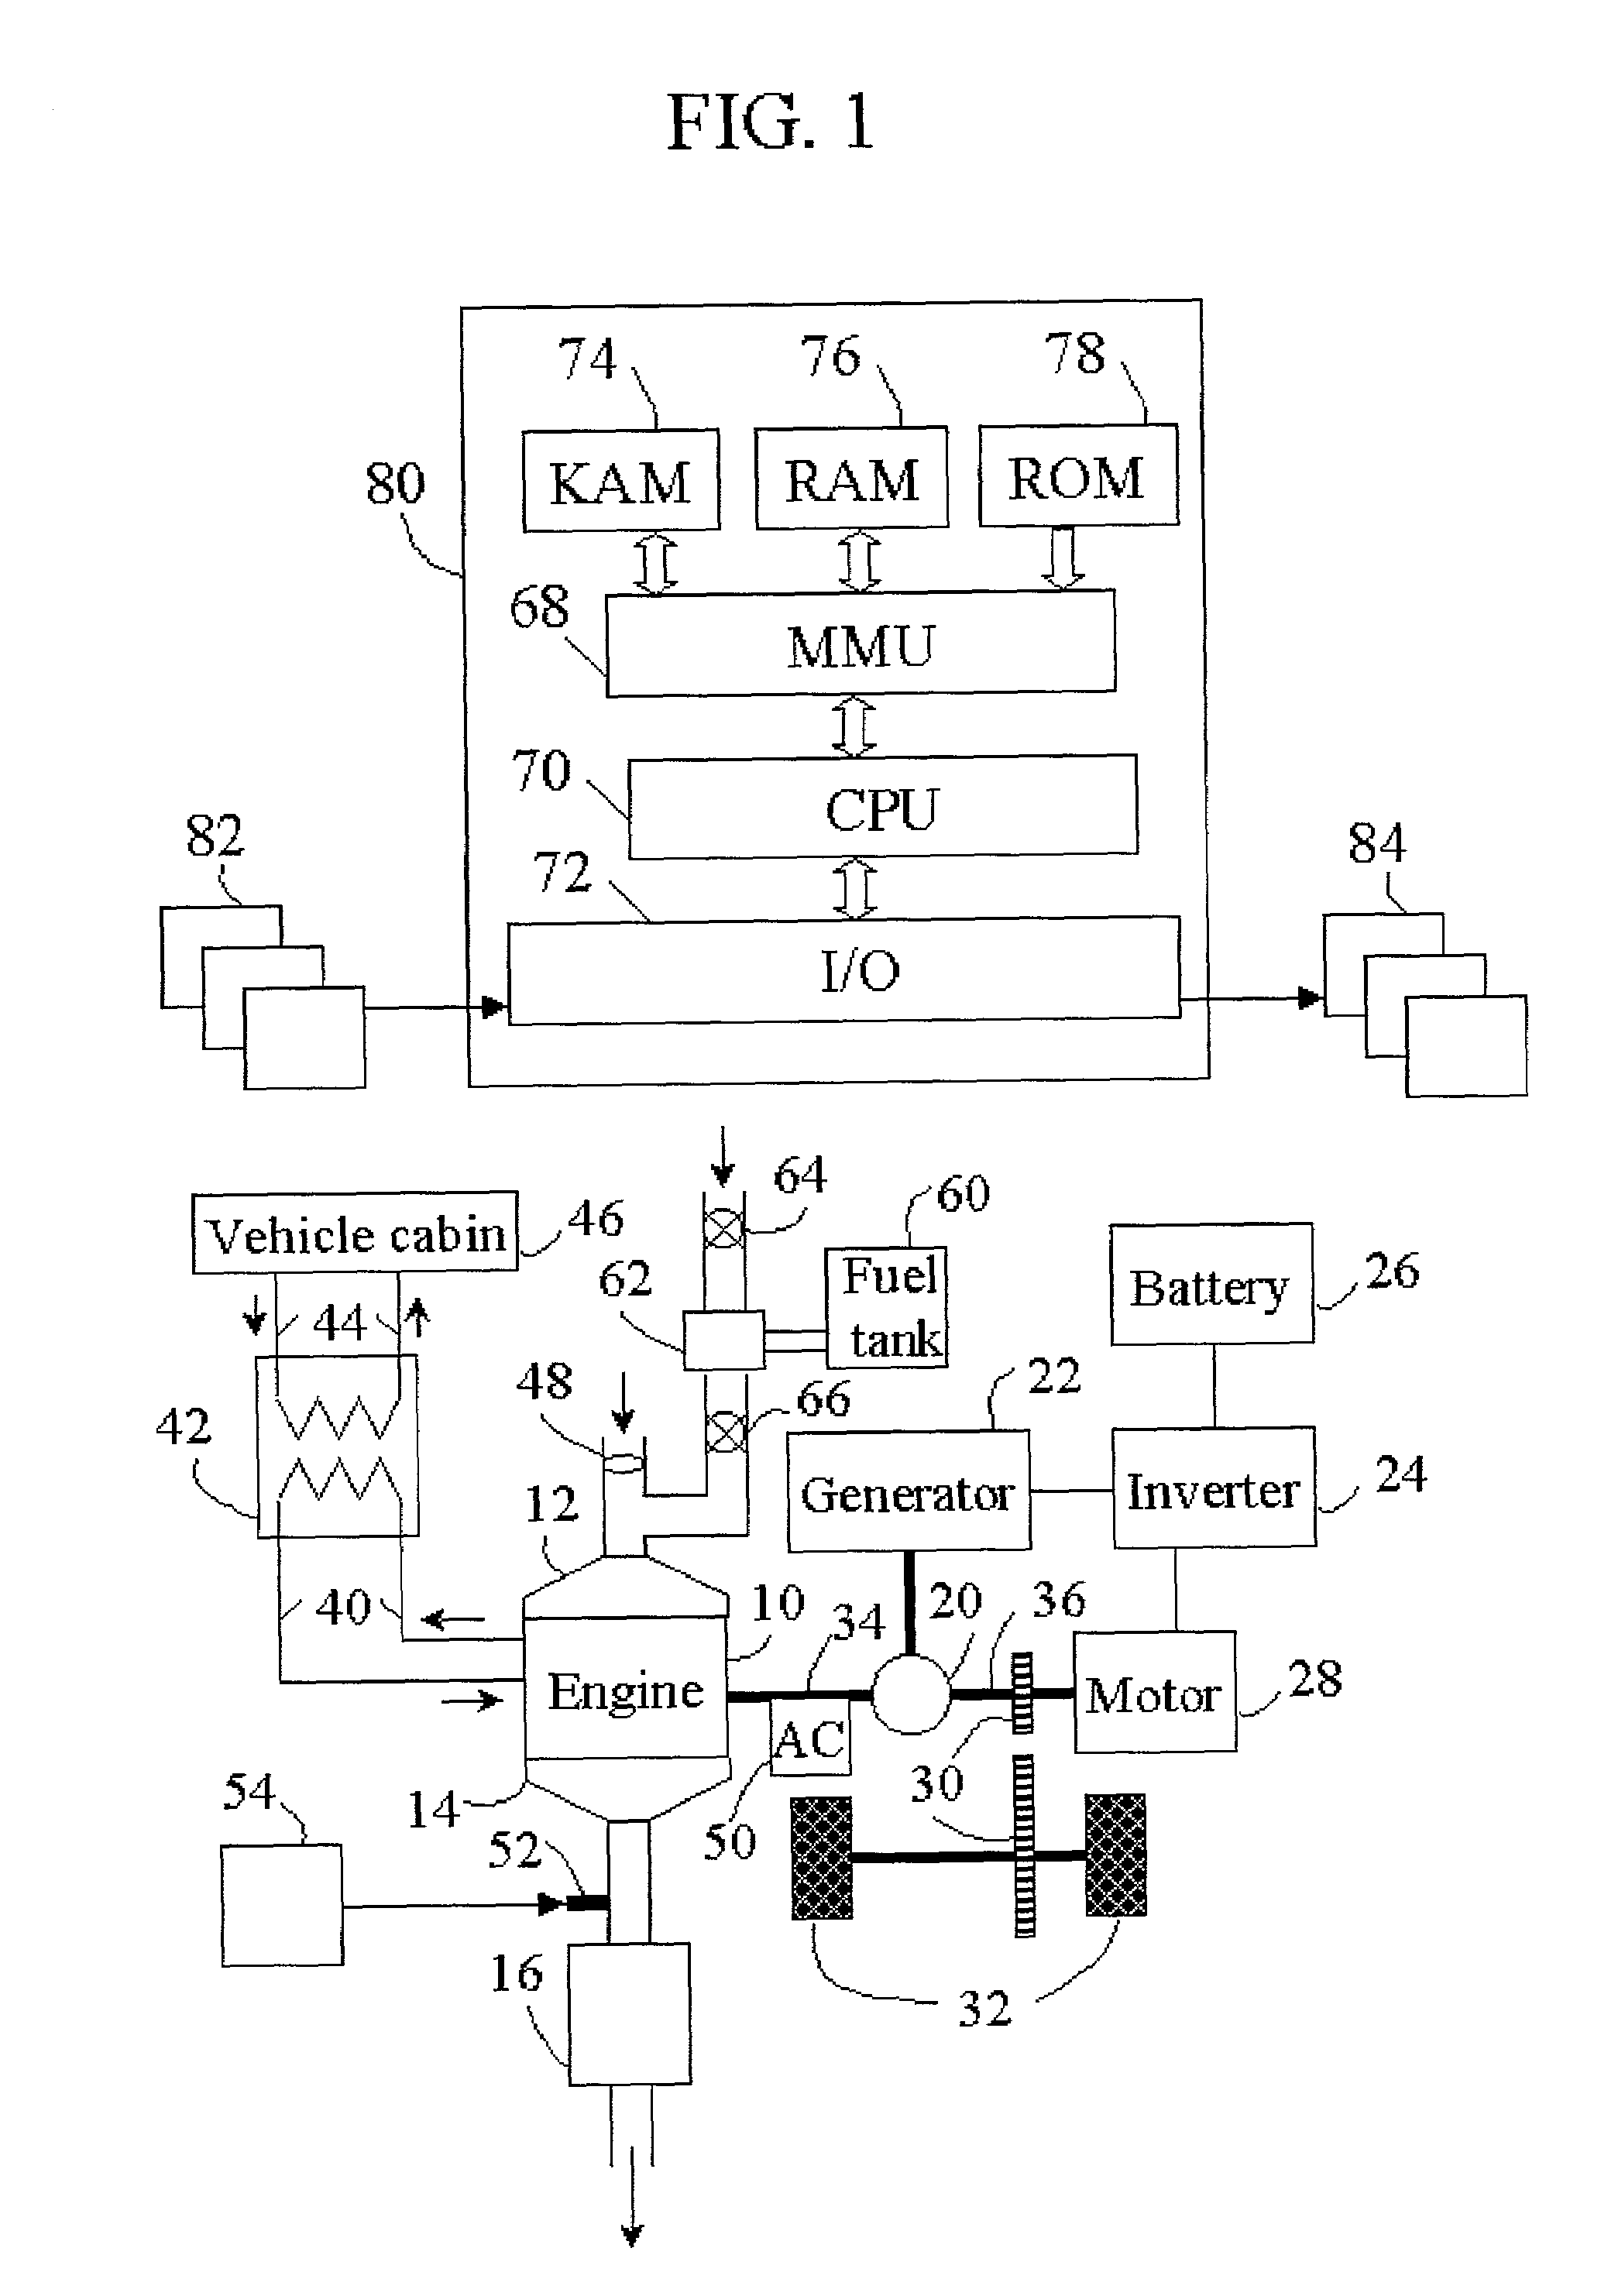 Control strategy for an internal combustion engine in a hybrid vehicle